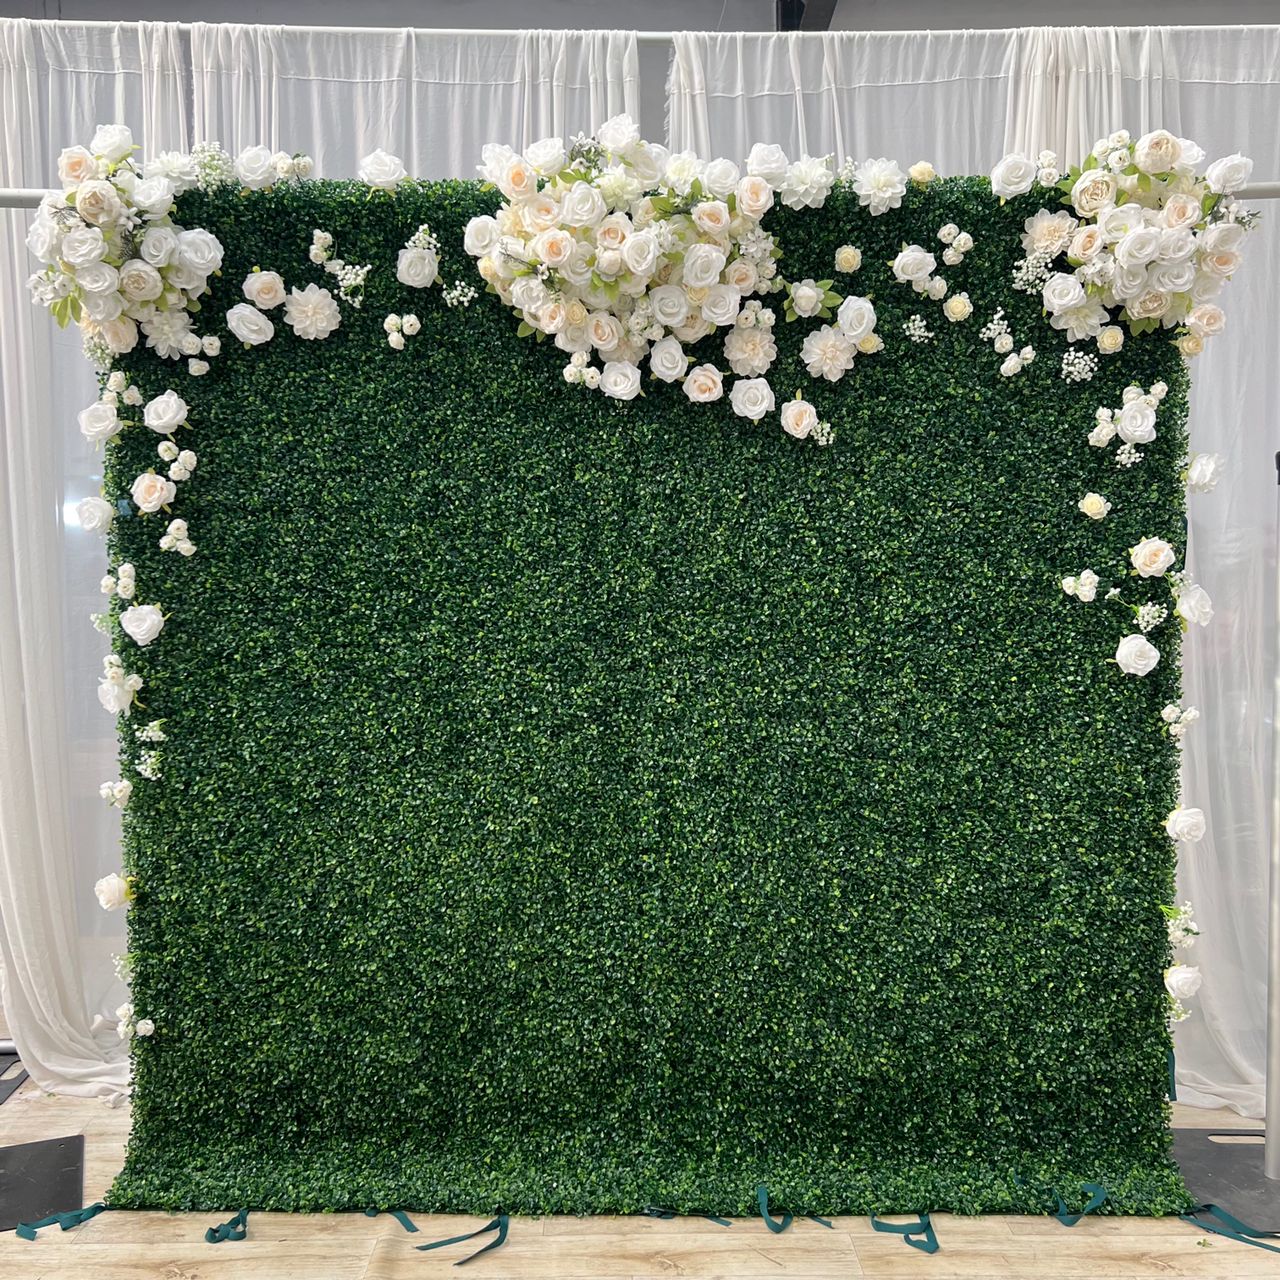 8x8 Hedge Wall w/ White Flowers FREE SHIPPING